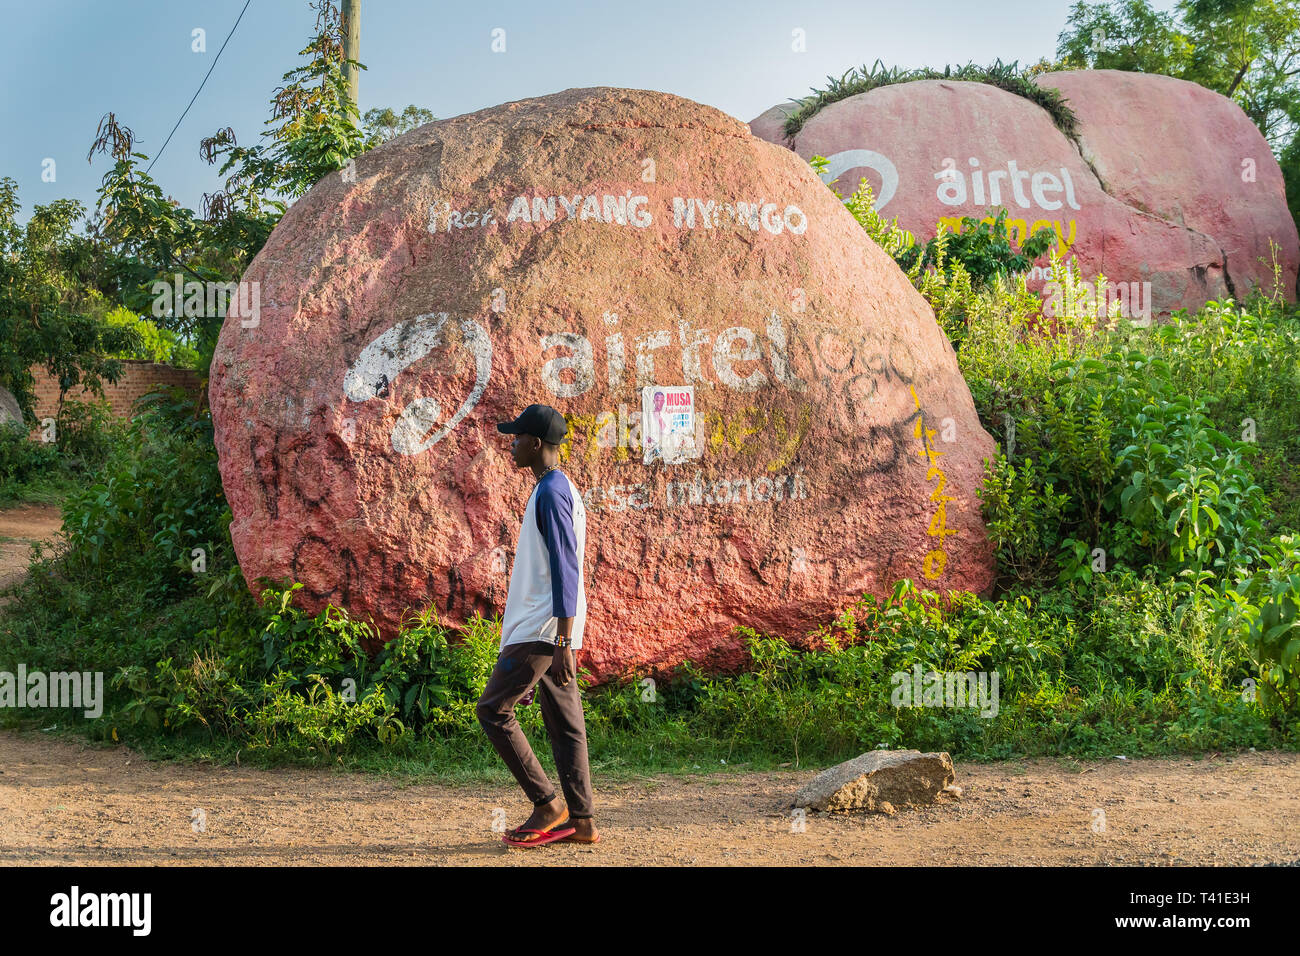 near Kisumu, Kenya - March 8, 2019 - advertisement of AirTel mobile phone service provider painted on huge boulders in the countryside Stock Photo